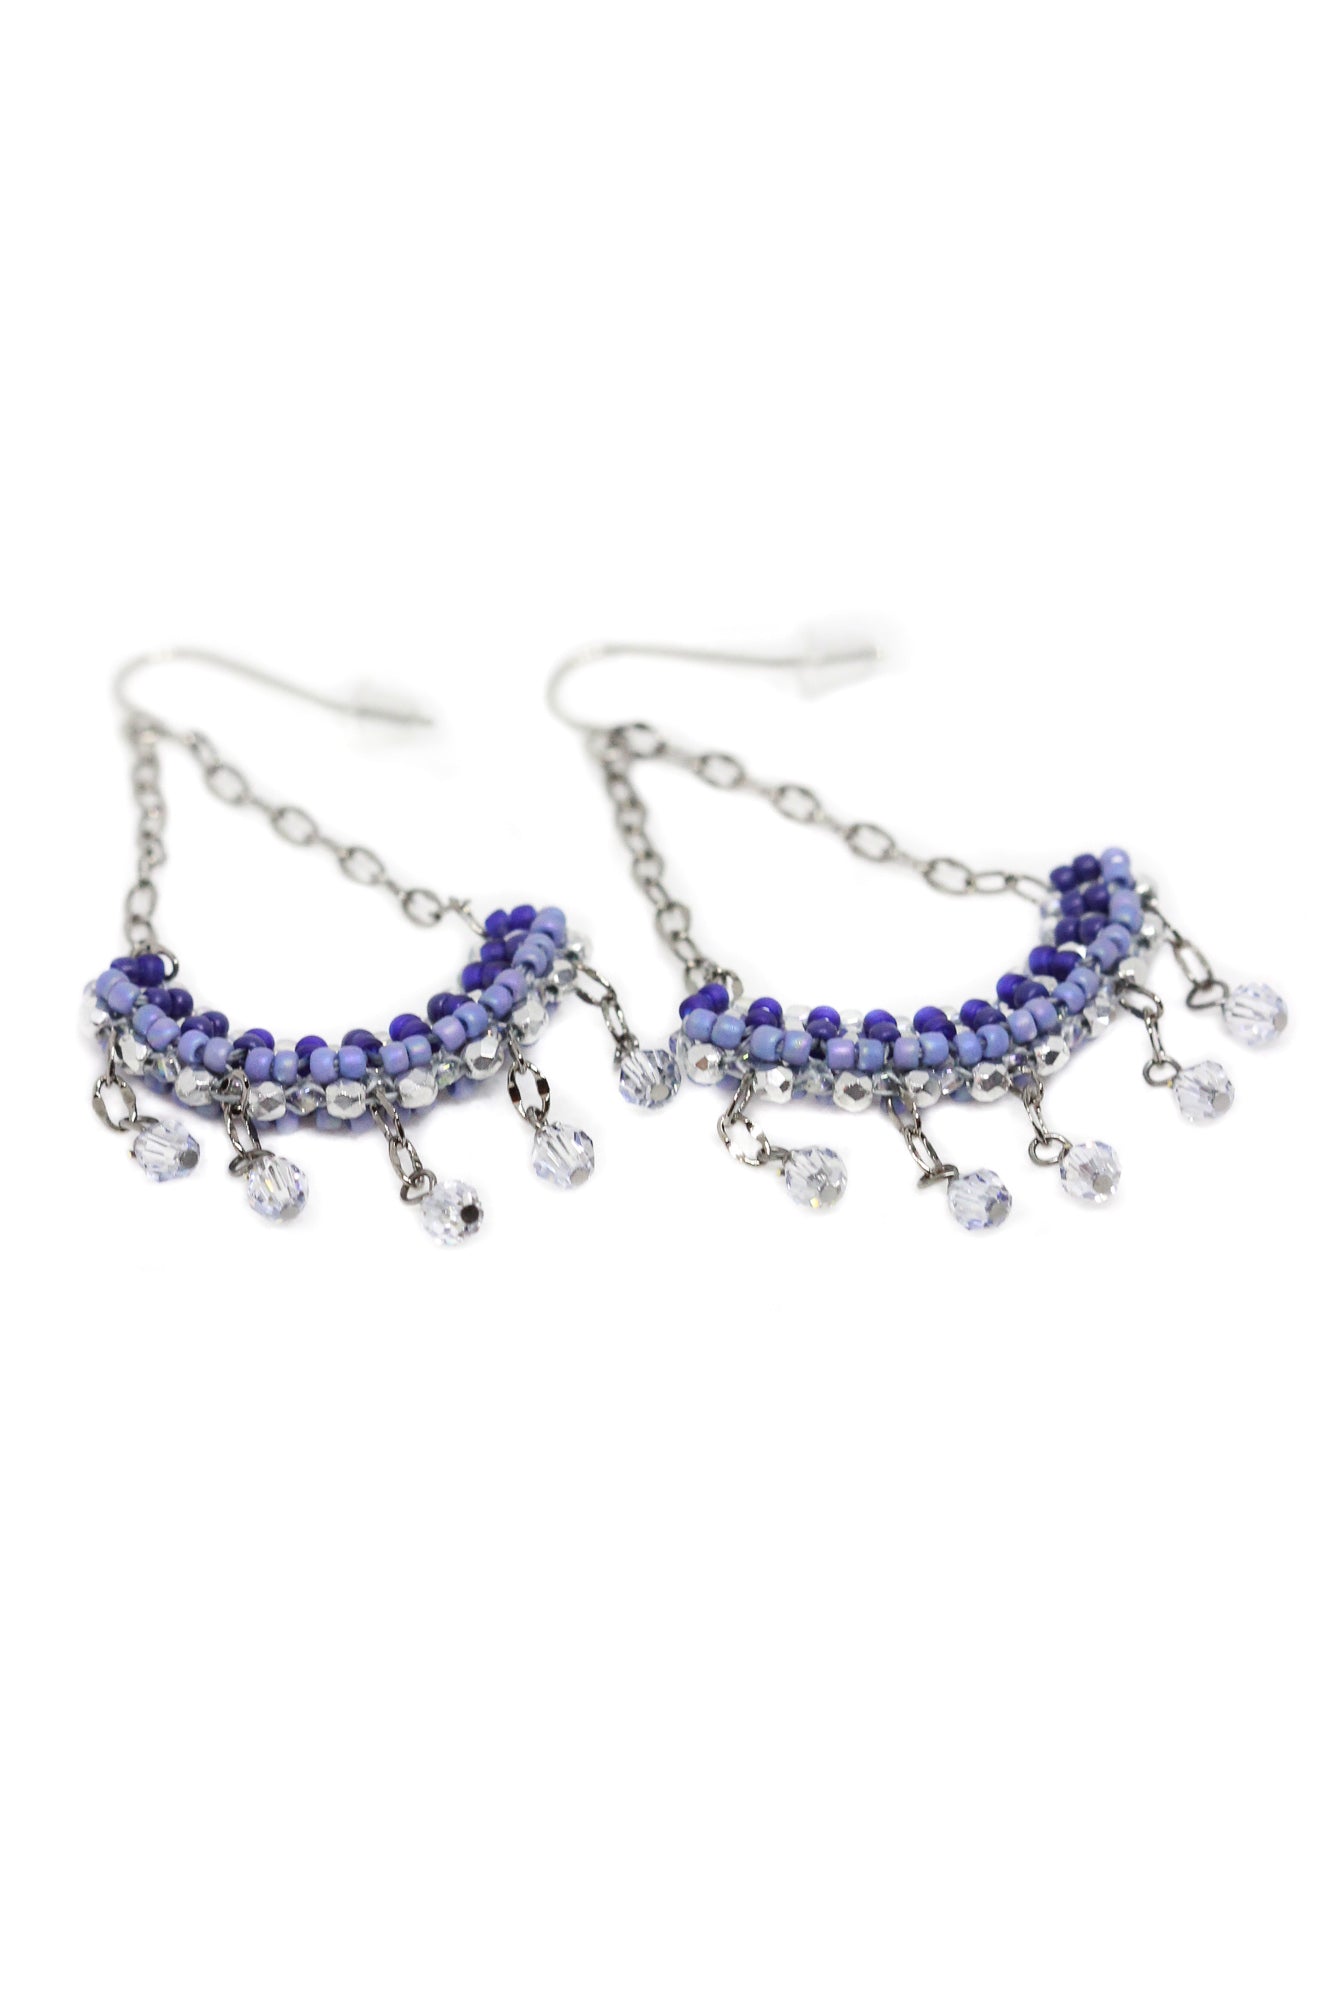 Vintage-inspired chandelier earrings that will transform any outfit from everyday lovely to fabulously glamourous. #vintageinspred #somethinblue #handcraftedjewelry #gottahaveit